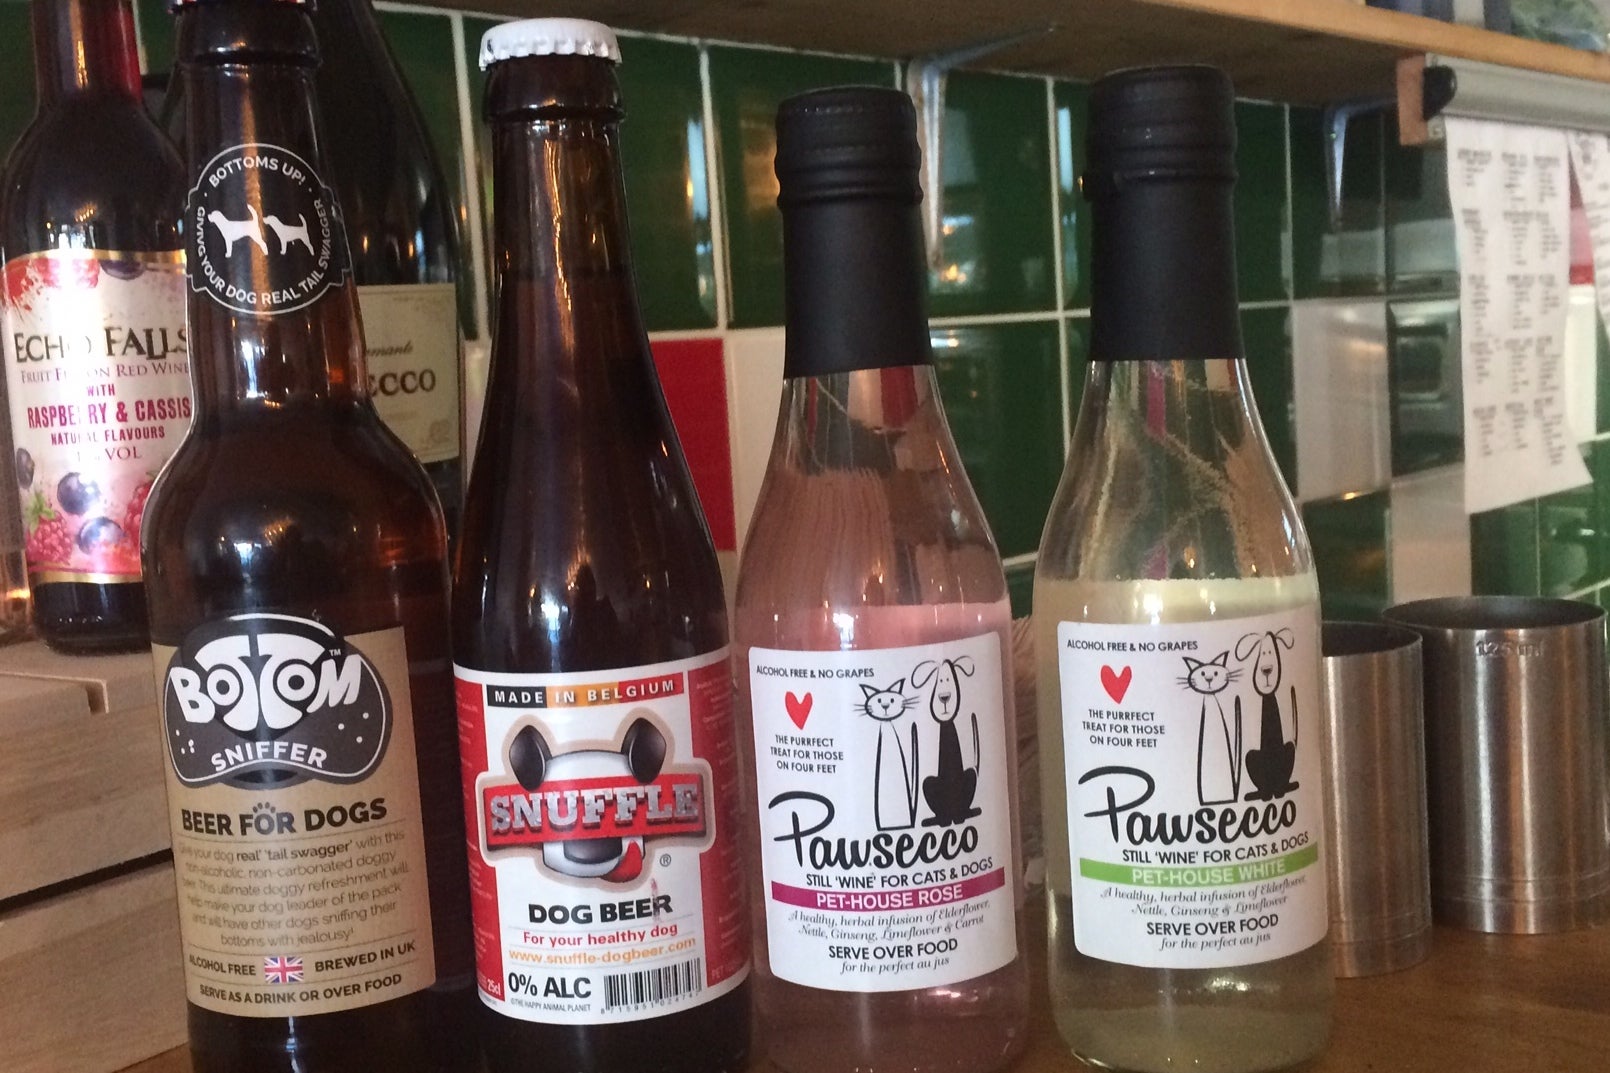 Pawsecco and Snuffle Dog beer are served at The Wet Dog Pizza